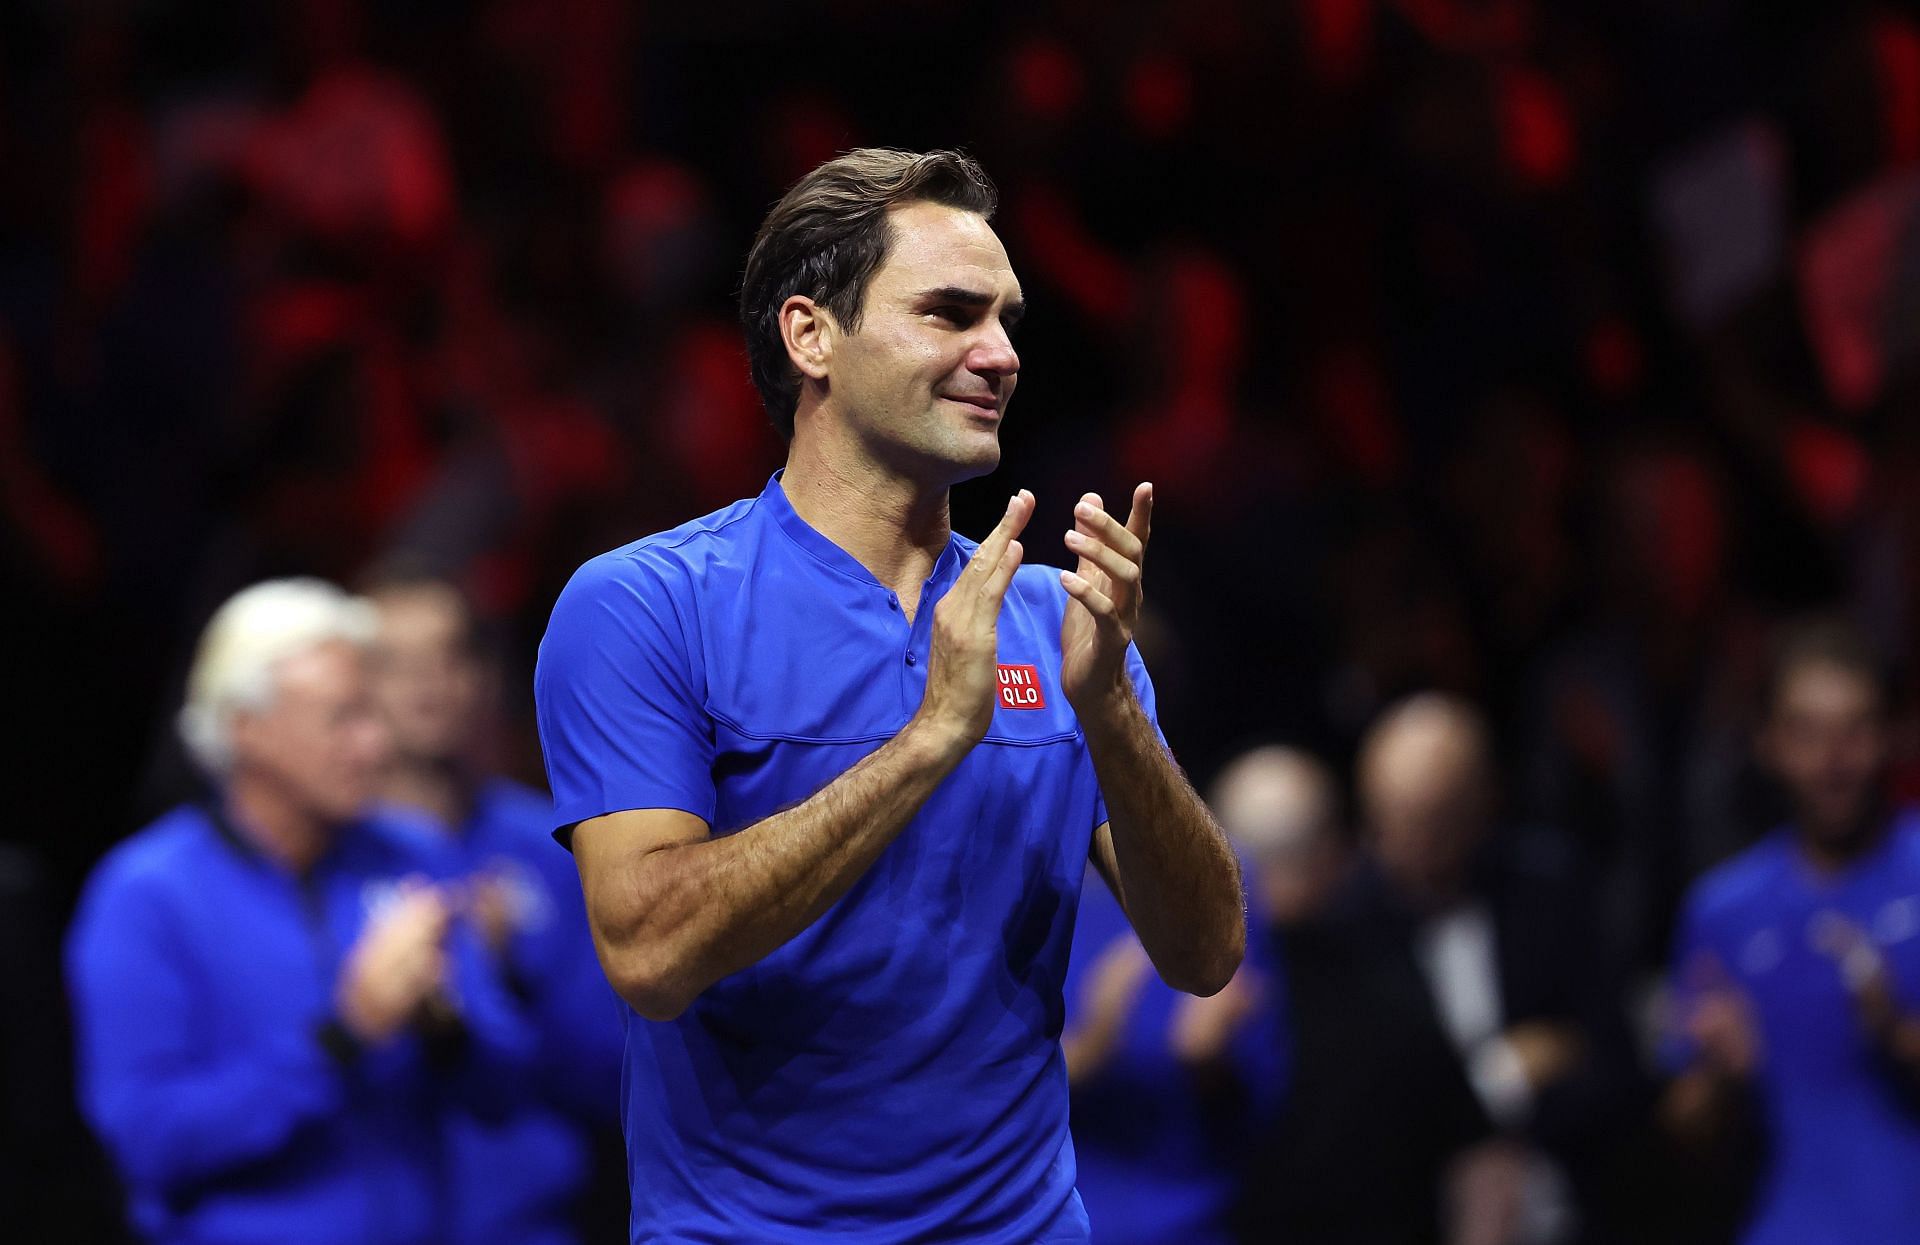 Roger Federer during his farewell at the 2022 Laver Cup